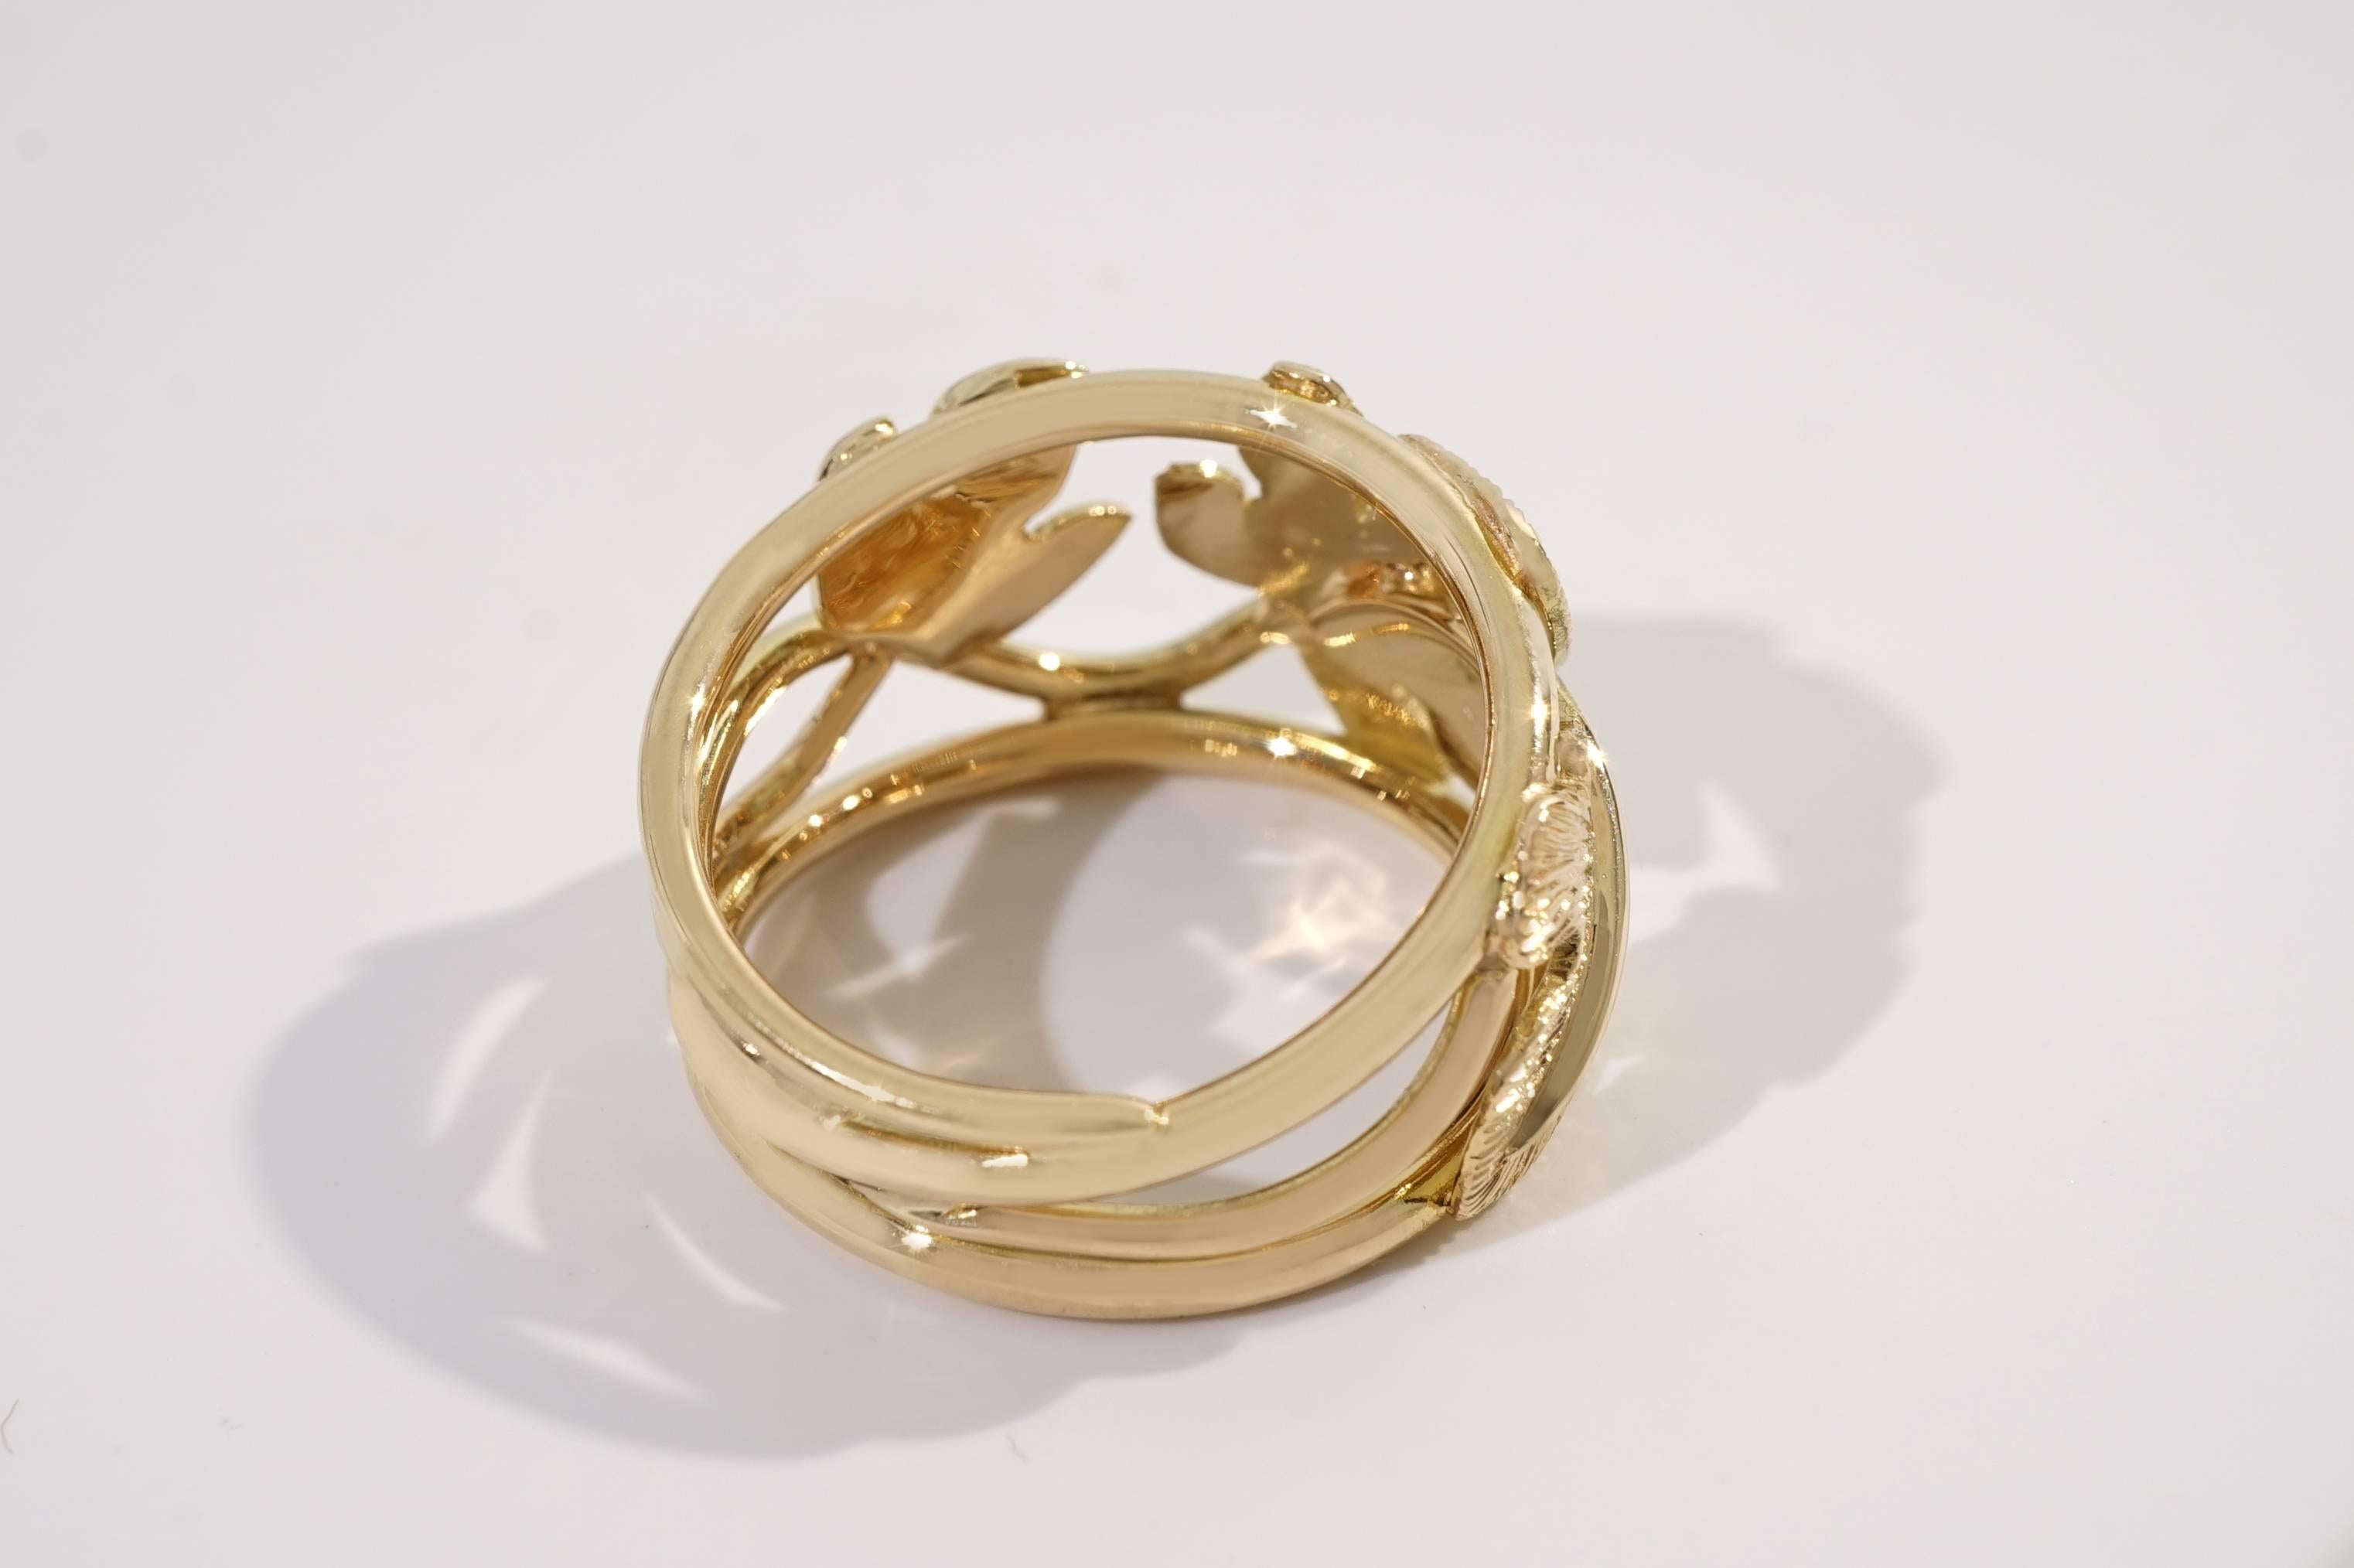 Coralie Van Caloen 18 Carat Gold Pinky Band Ring Hand Engraved Fig Leaves For Sale 1